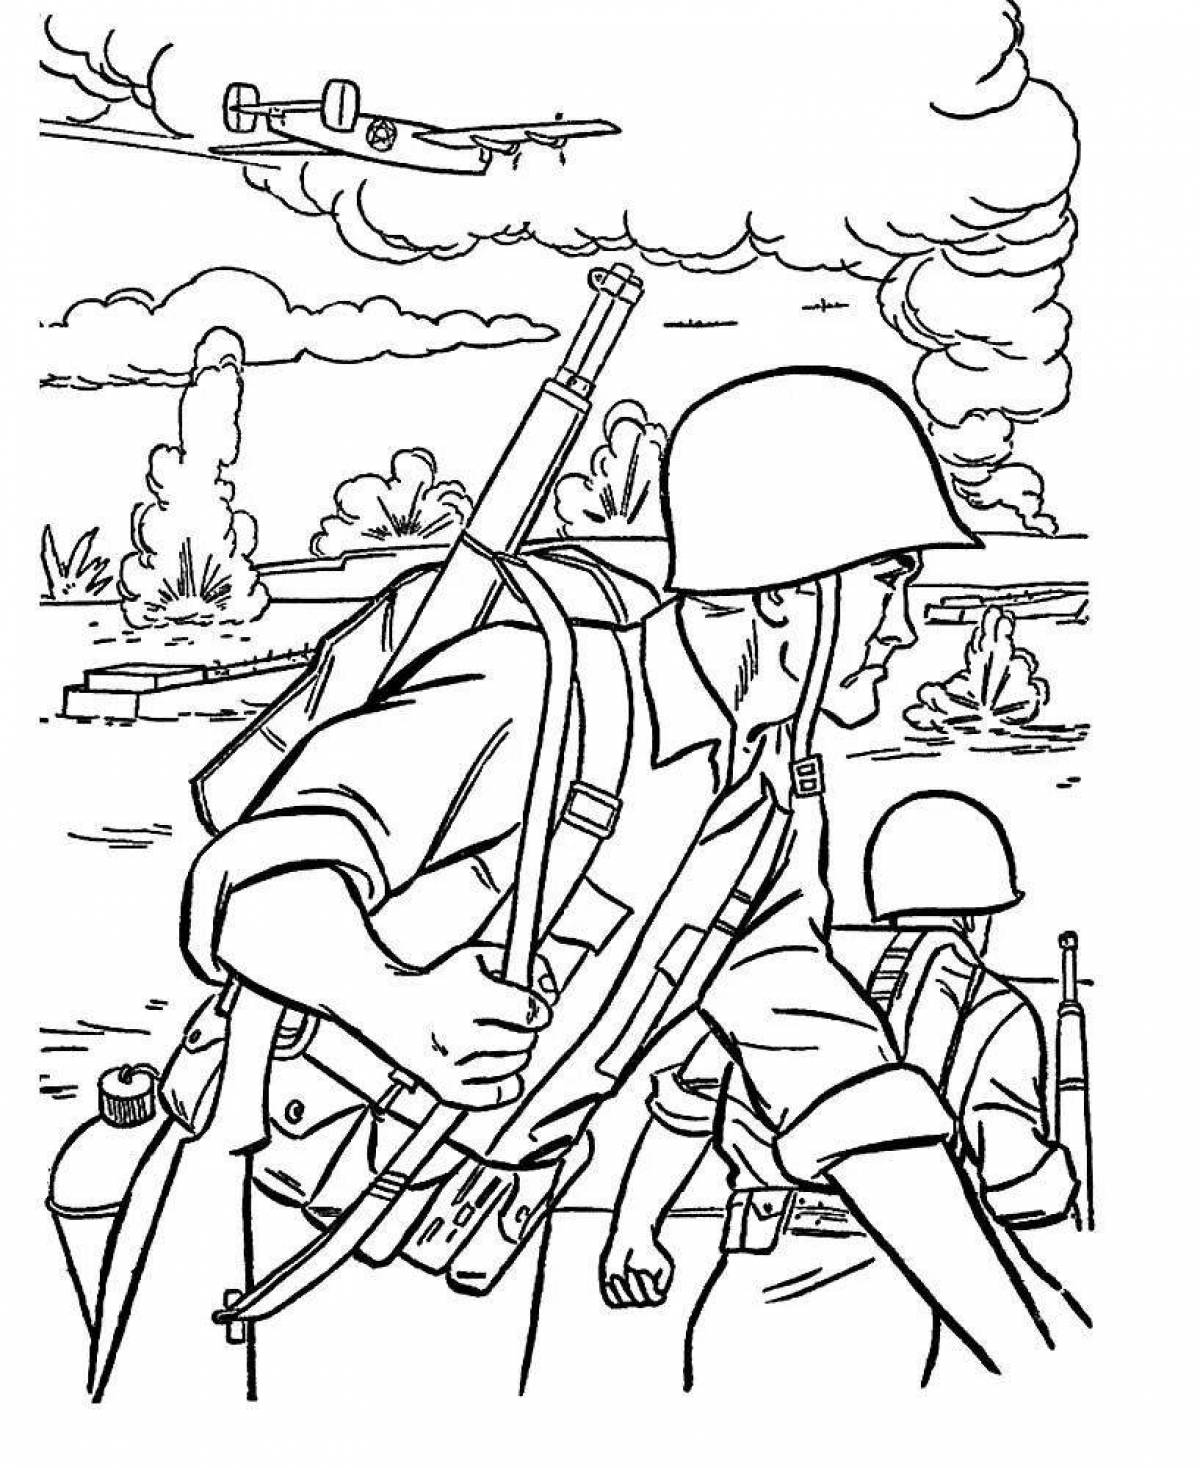 Coloring pages of war heroes for kids